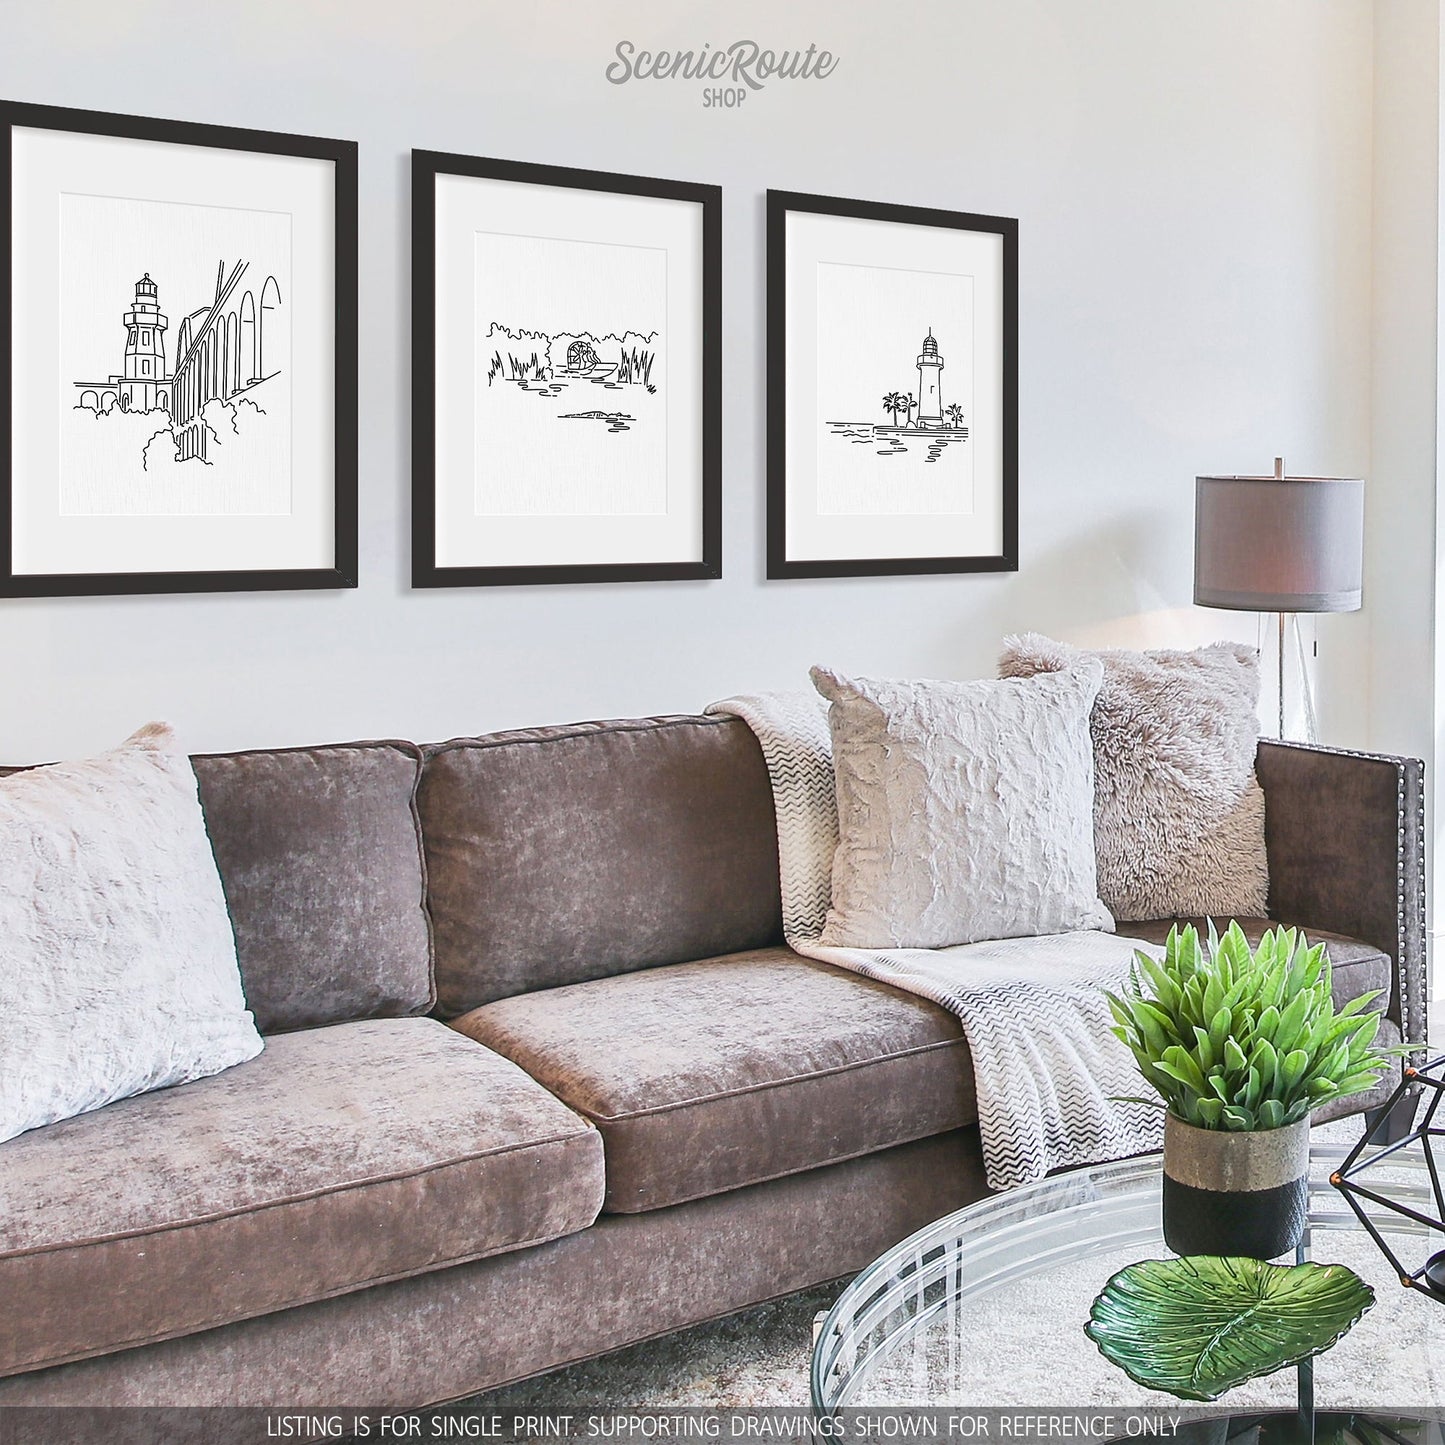 A group of three framed drawings on a white wall hanging above a couch with pillows and a blanket. The line art drawings include Dry Tortugas National Park, Everglades National Park, and Biscayne National Park